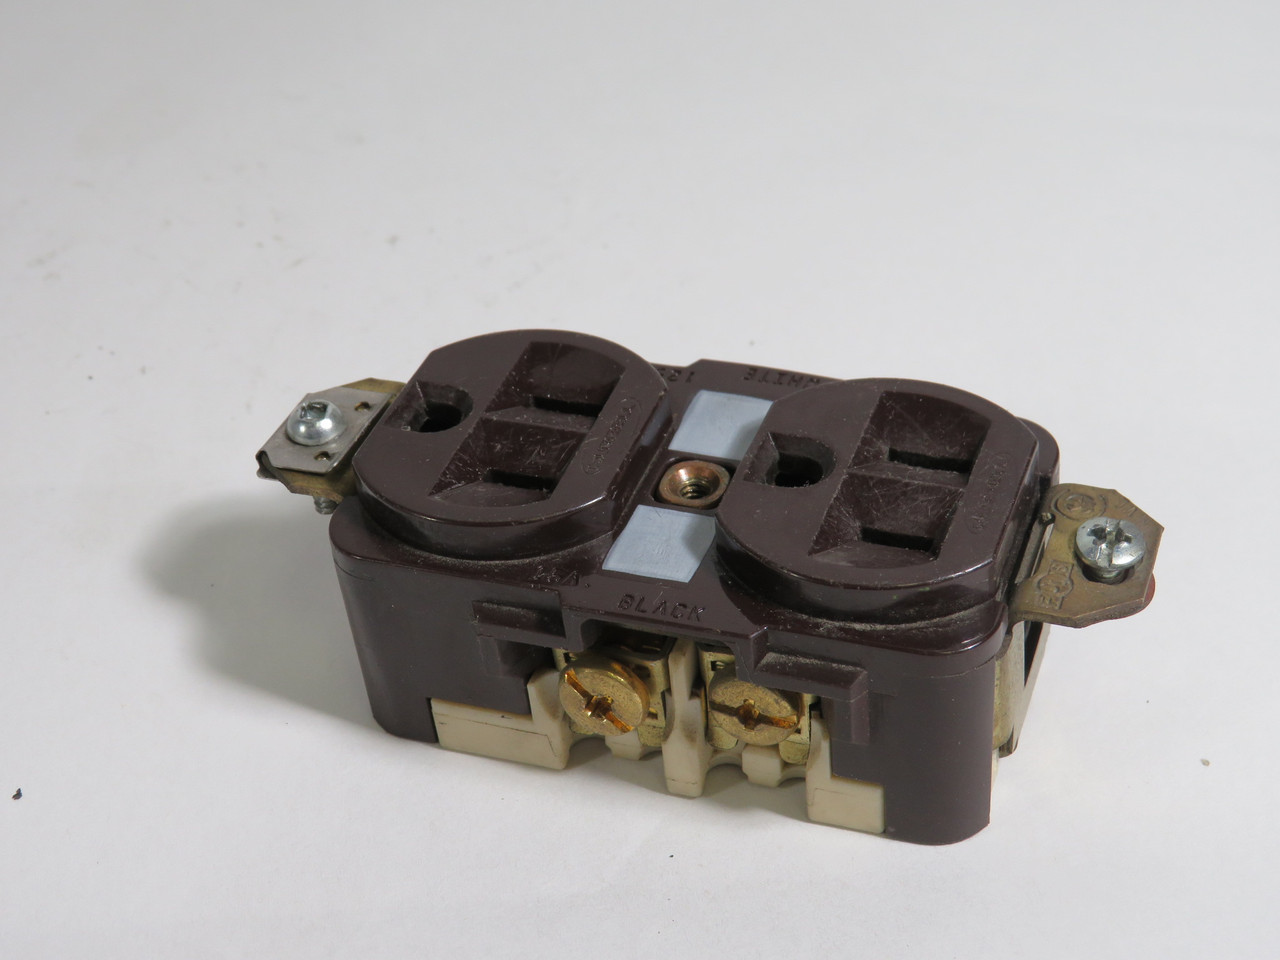 Hubbell HBL5262 Duplex Receptacle Brown 15A 125V 2 Pole 3 Wire Missing Tabs USED